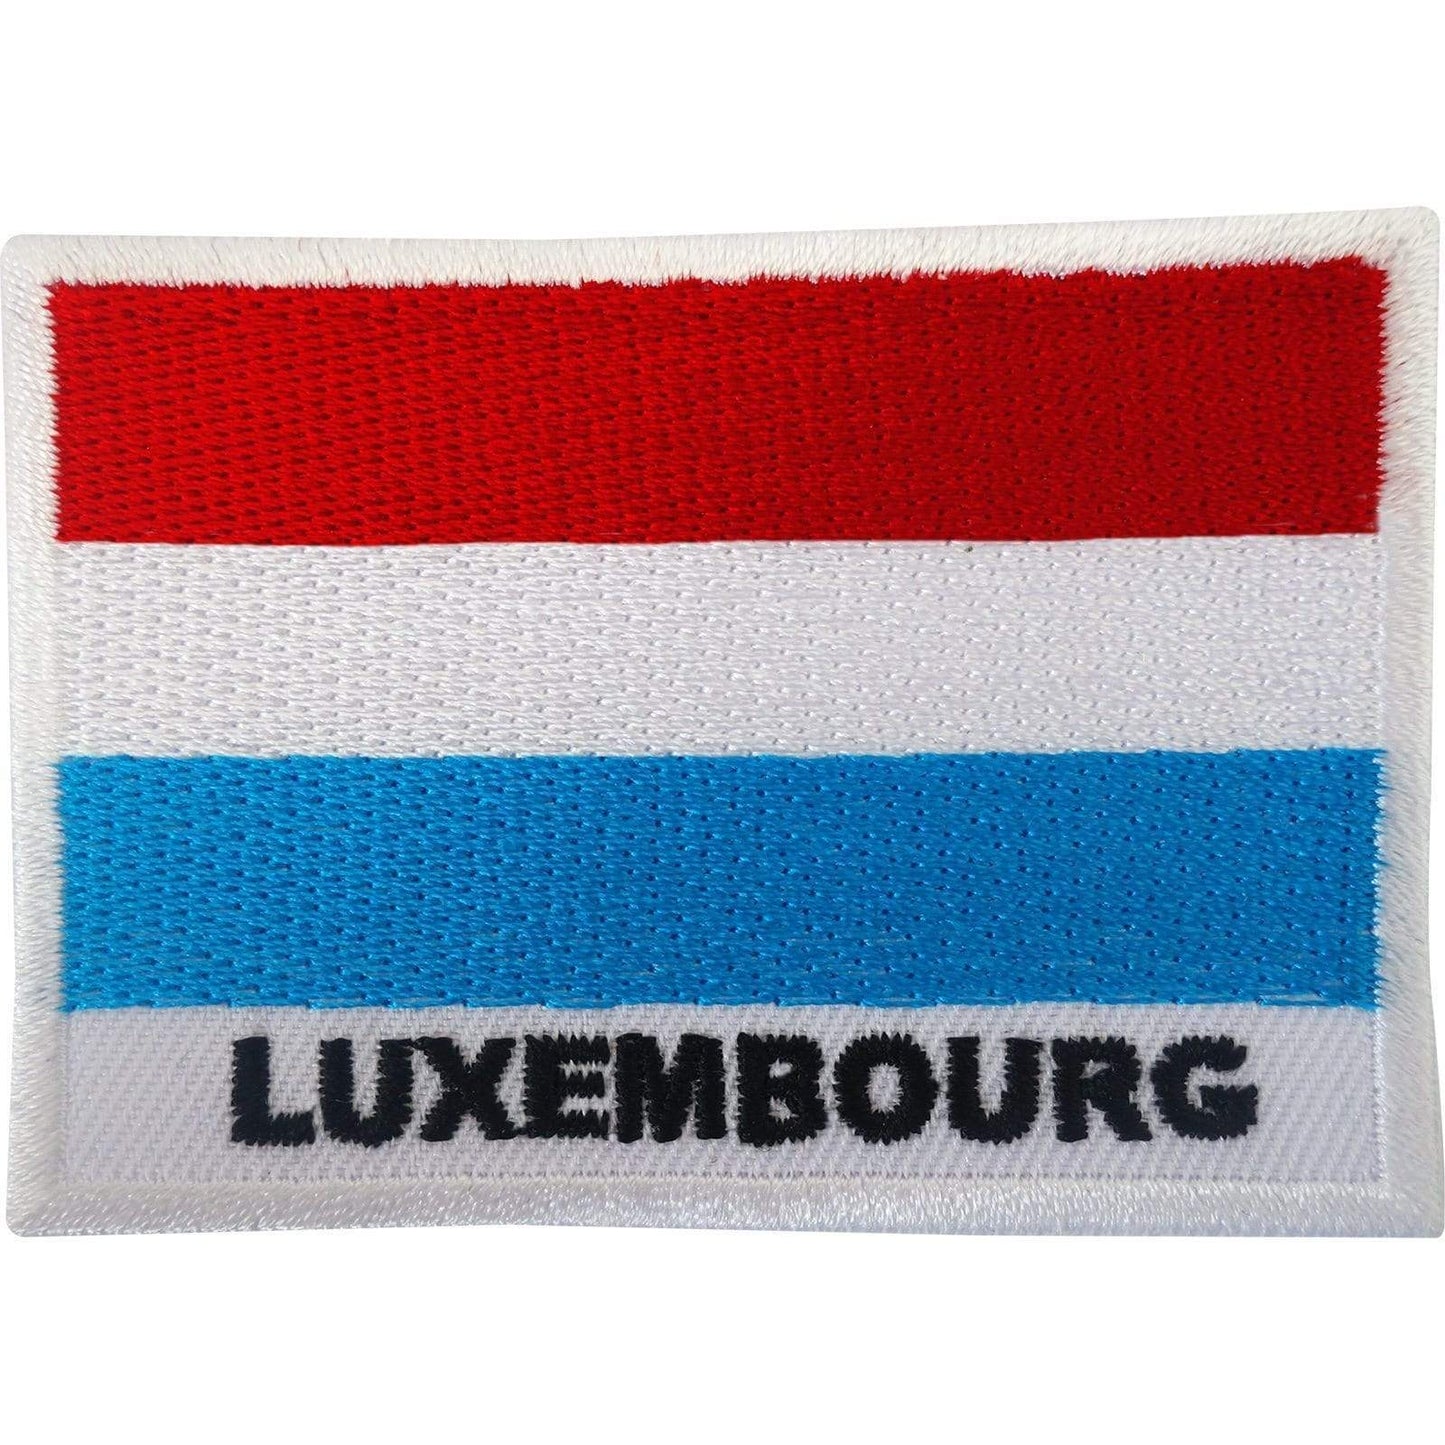 Luxembourg Flag Patch Iron On Sew On Badge Embroidered Embroidery Applique Motif